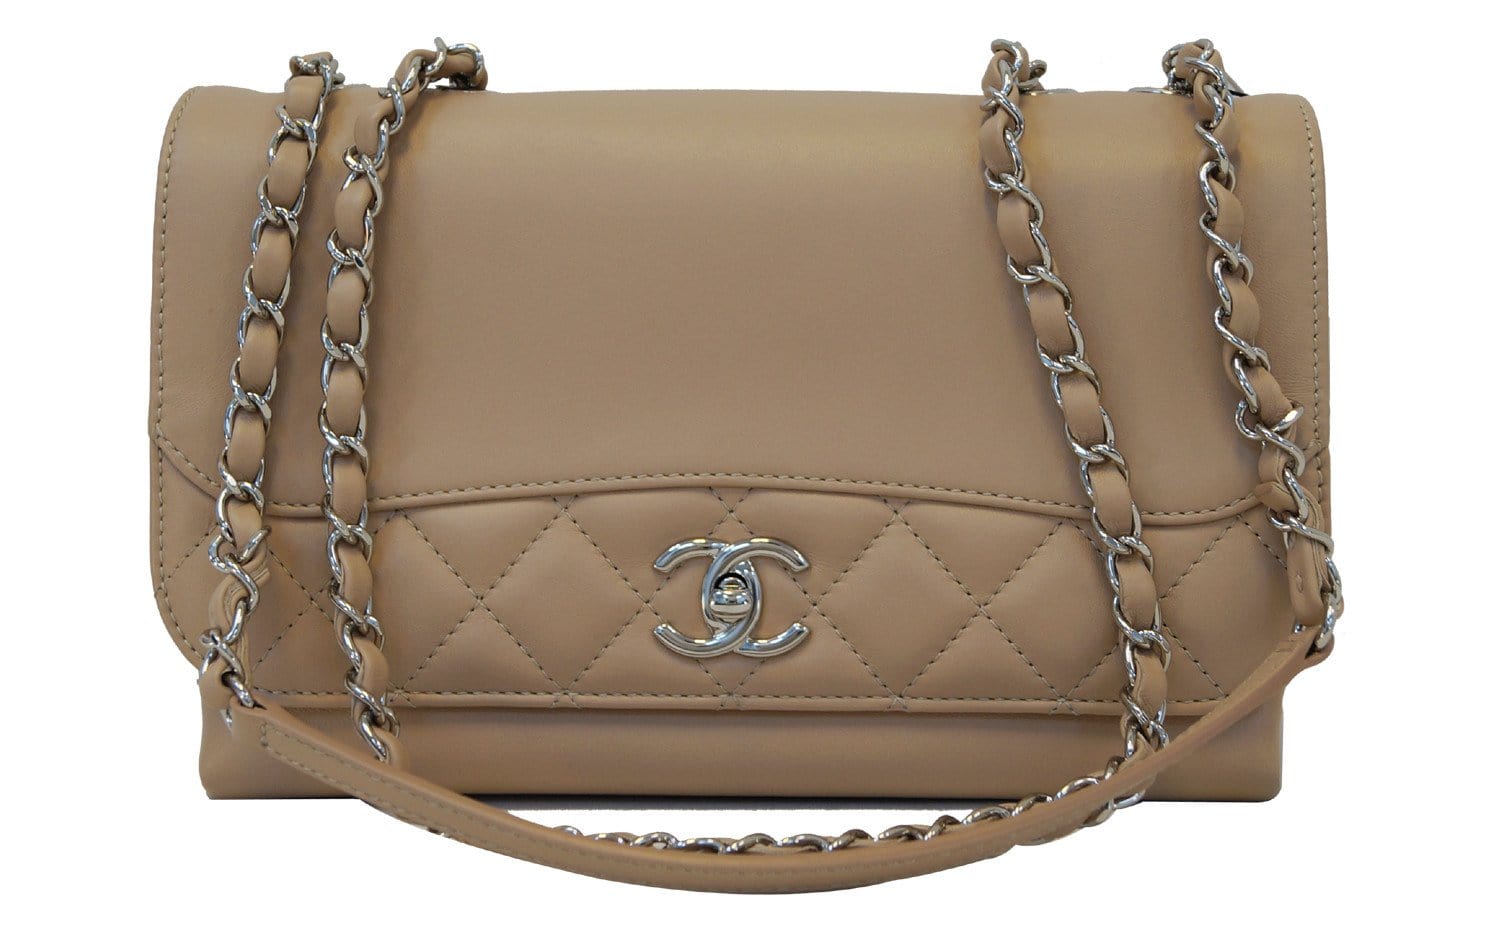 Rare CHANEL Classic Quilted Leather Double Chain CC Shoulder Bag - 30%